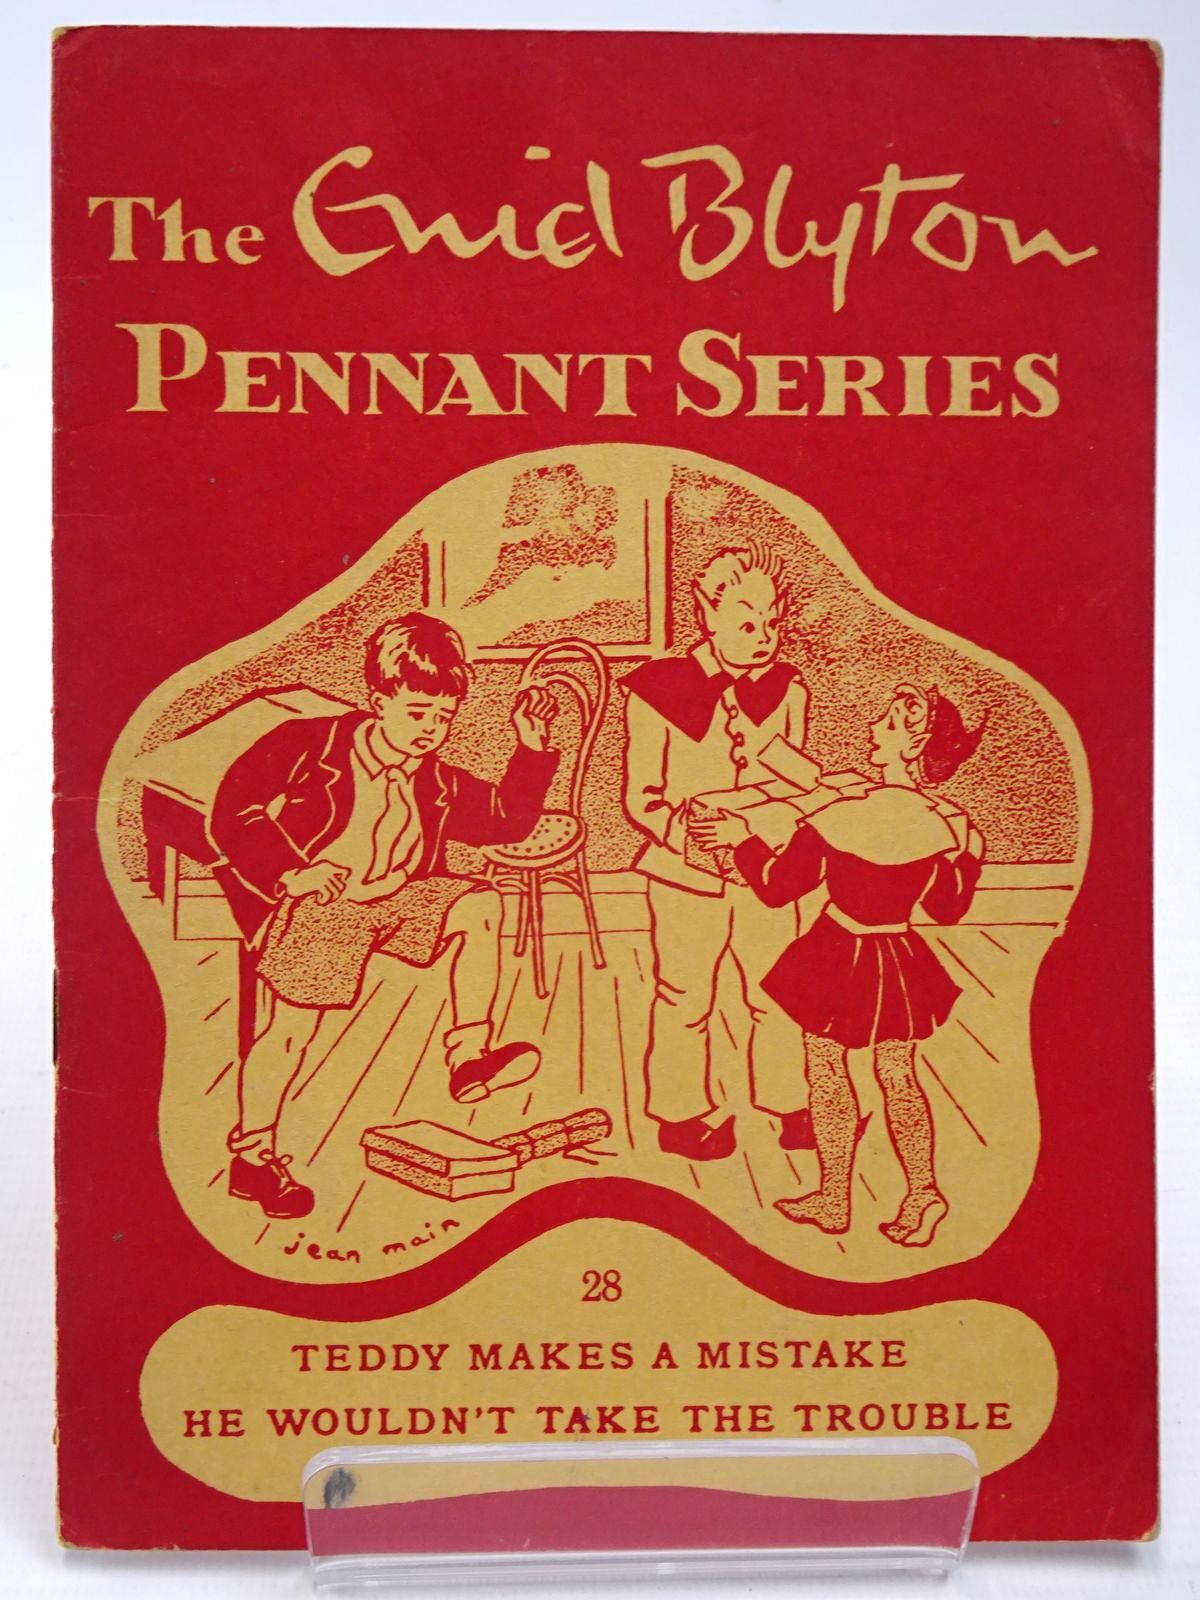 Photo of THE ENID BLYTON PENNANT SERIES No. 28 TEDDY MAKES A MISTAKE / HE WOULDN'T TAKE THE TROUBLE written by Blyton, Enid illustrated by Soper, Eileen
Main, Jean published by Macmillan & Co. Ltd. (STOCK CODE: 2130526)  for sale by Stella & Rose's Books